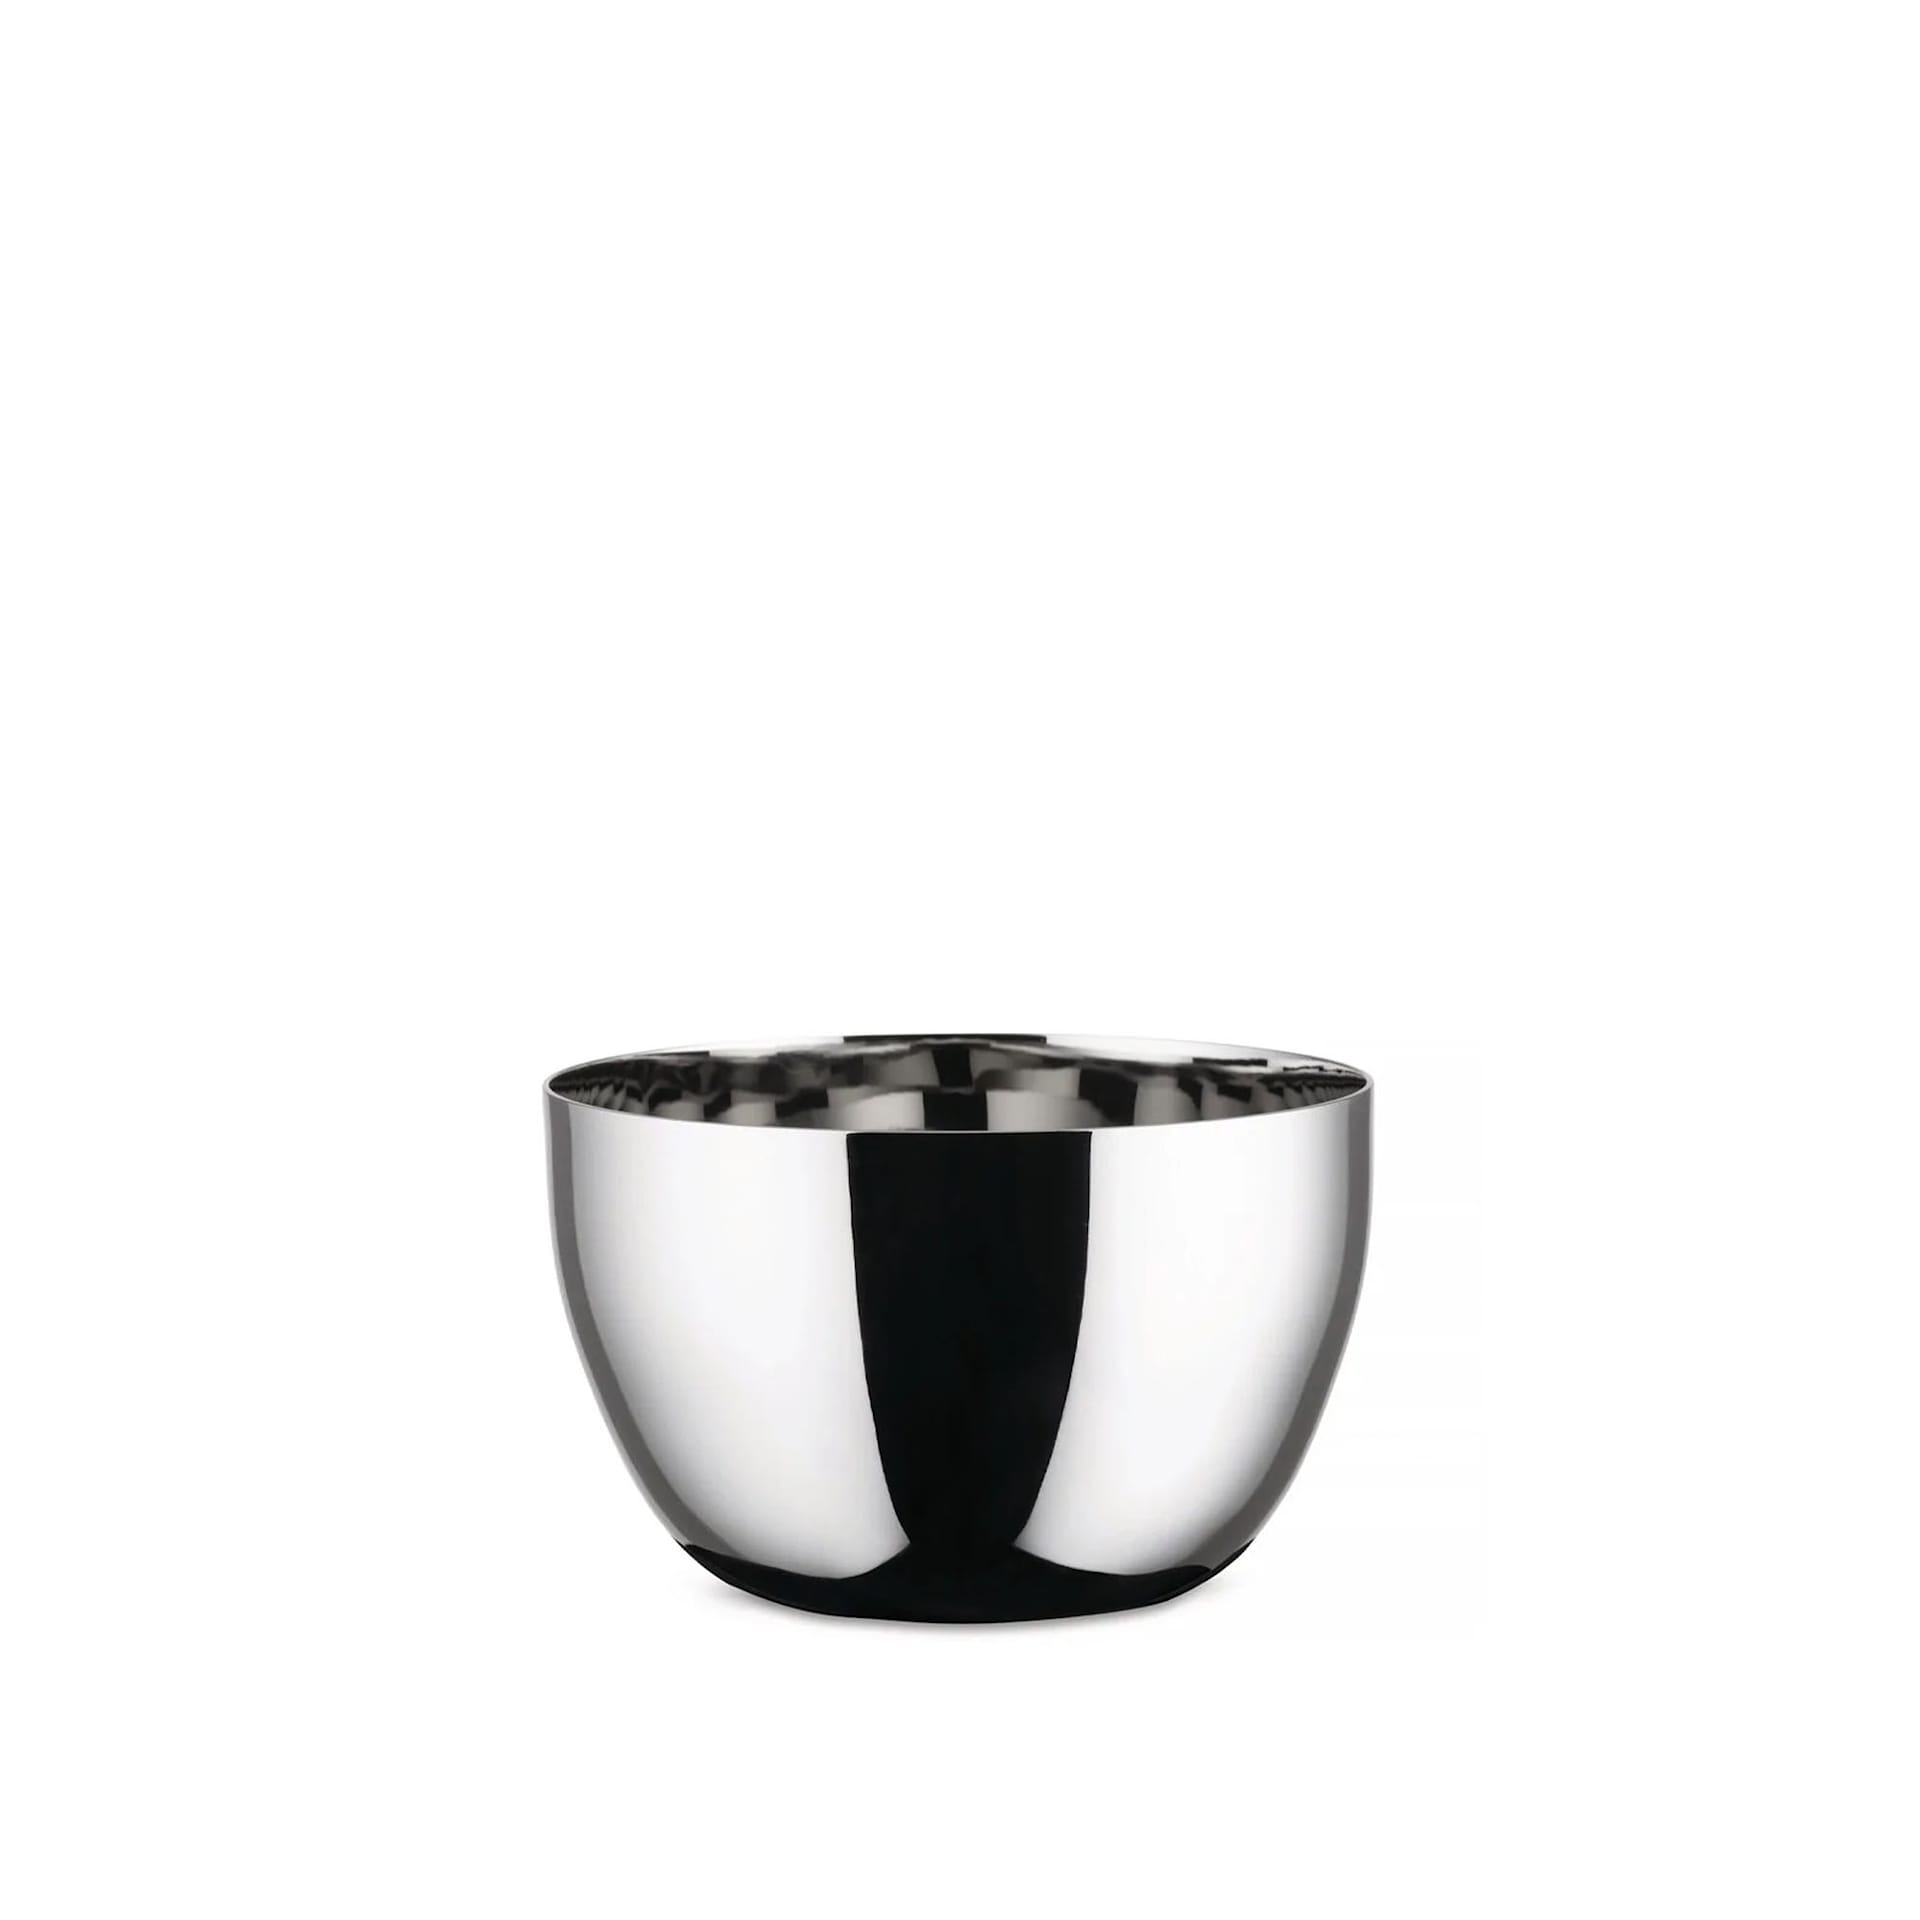 Mami Set of 3 bowls Stainless steel - Alessi - NO GA